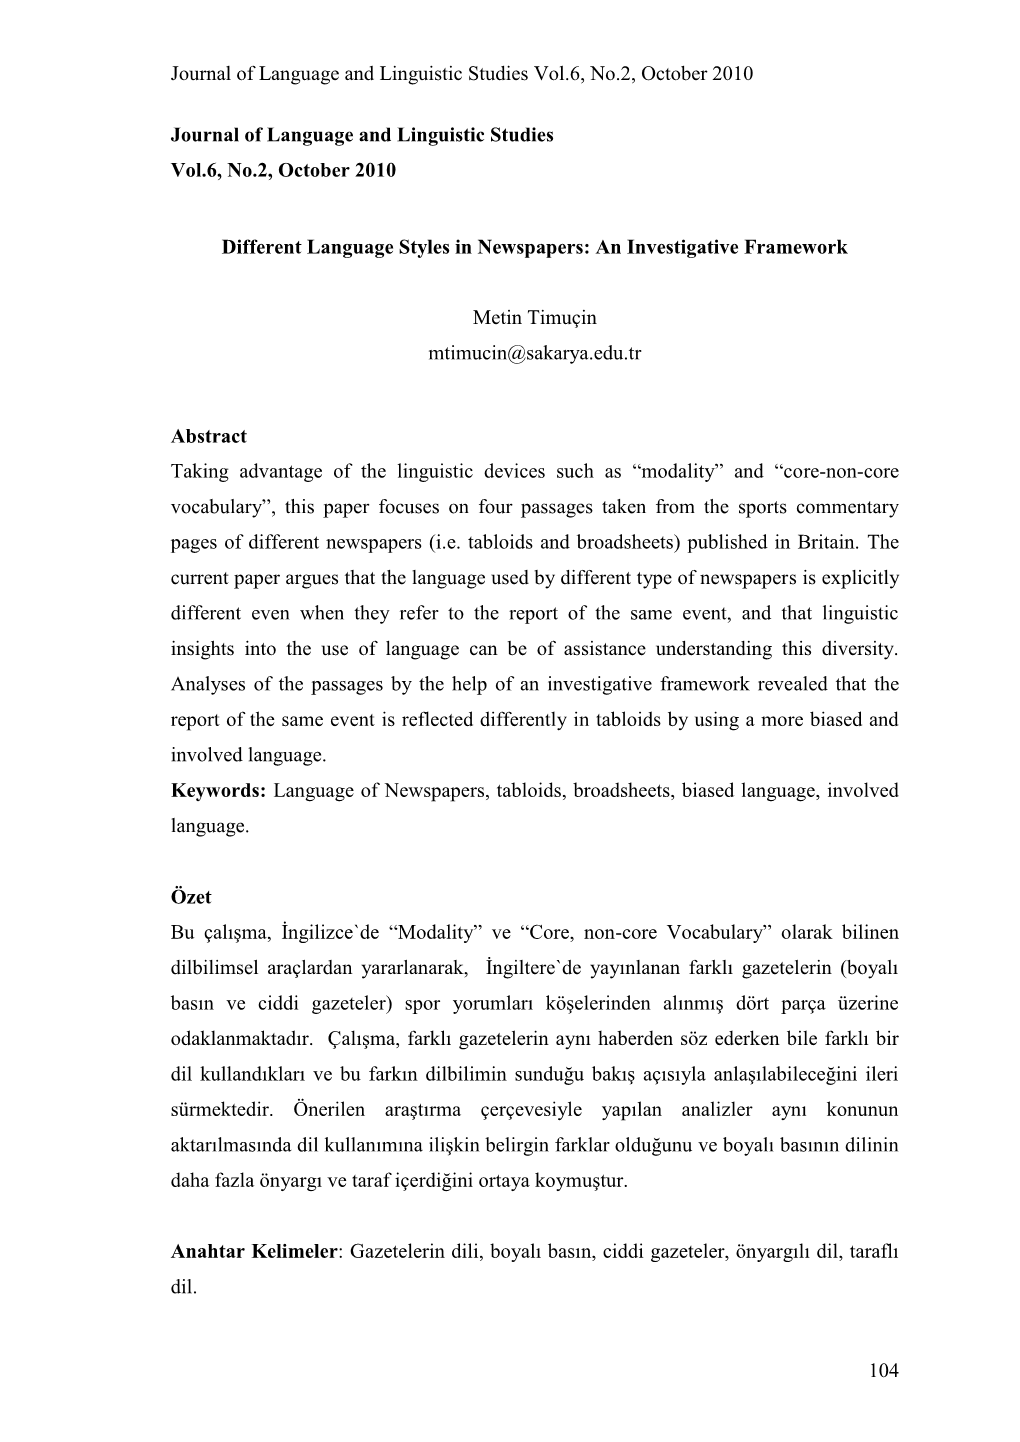 Journal of Language and Linguistic Studies Vol.6, No.2, October 2010